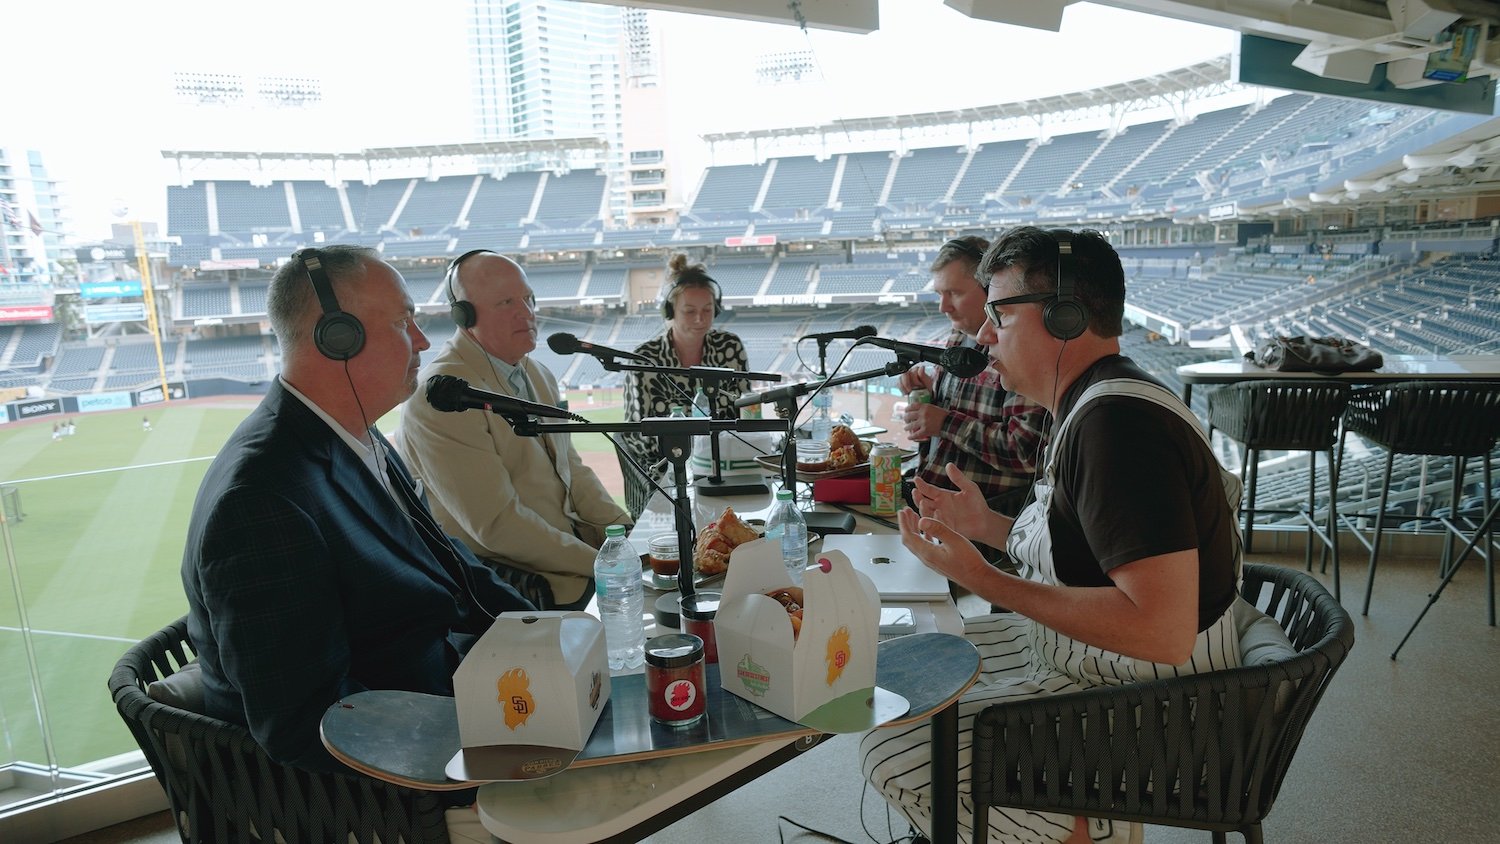 Episode of Happy Half Hour podcast by San Diego Magazine featuring Troy Johnson and David Martin trying Petco Park food with legendary Padres announcers Mark "Mud" Grant and Don Orsillo